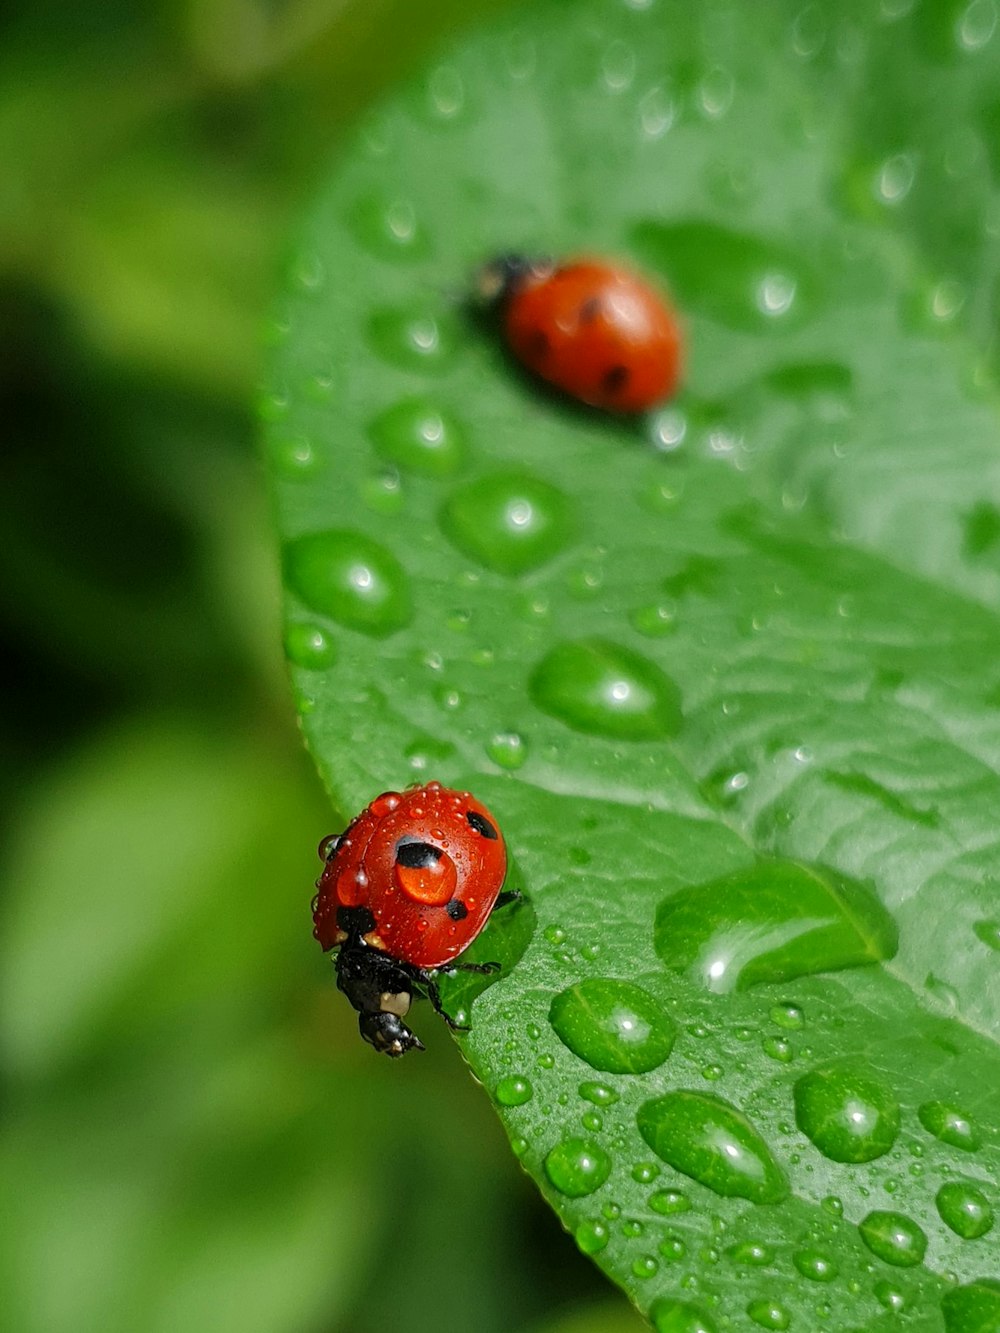 two ladybugs sitting on a green leaf in the rain